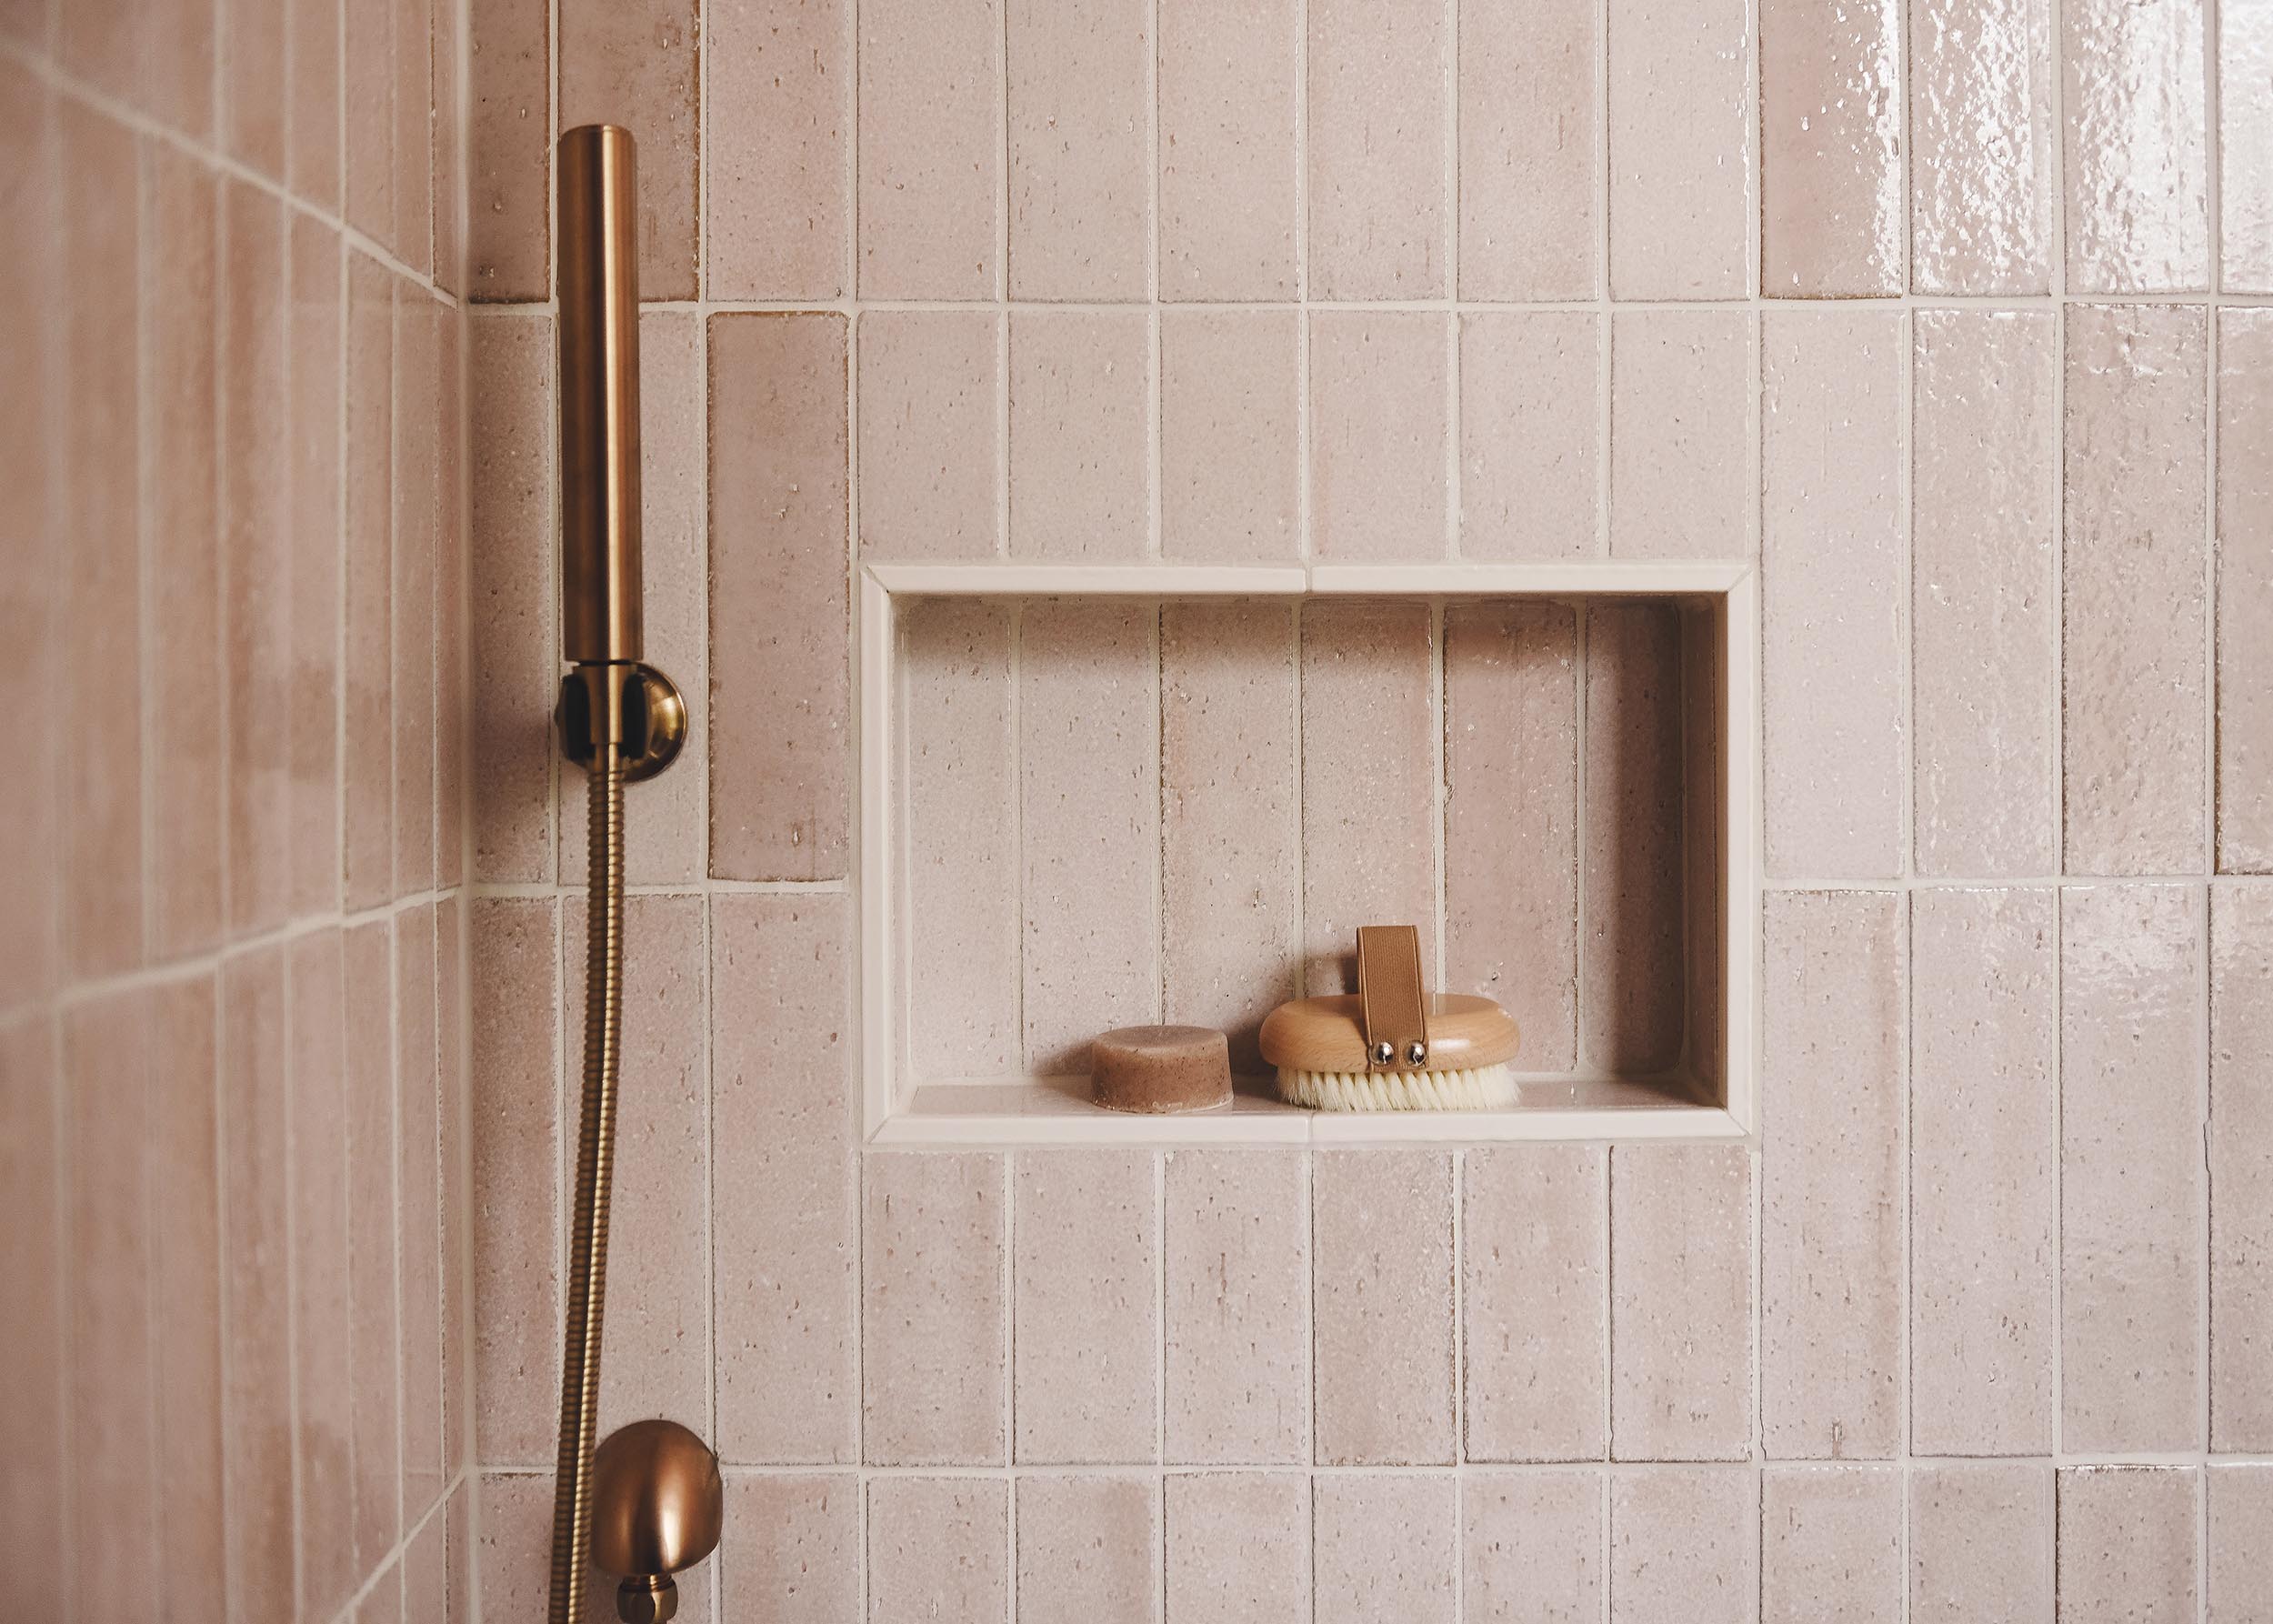 Brick by brick petal tile from the tile shop, detail | via Yellow Brick Home